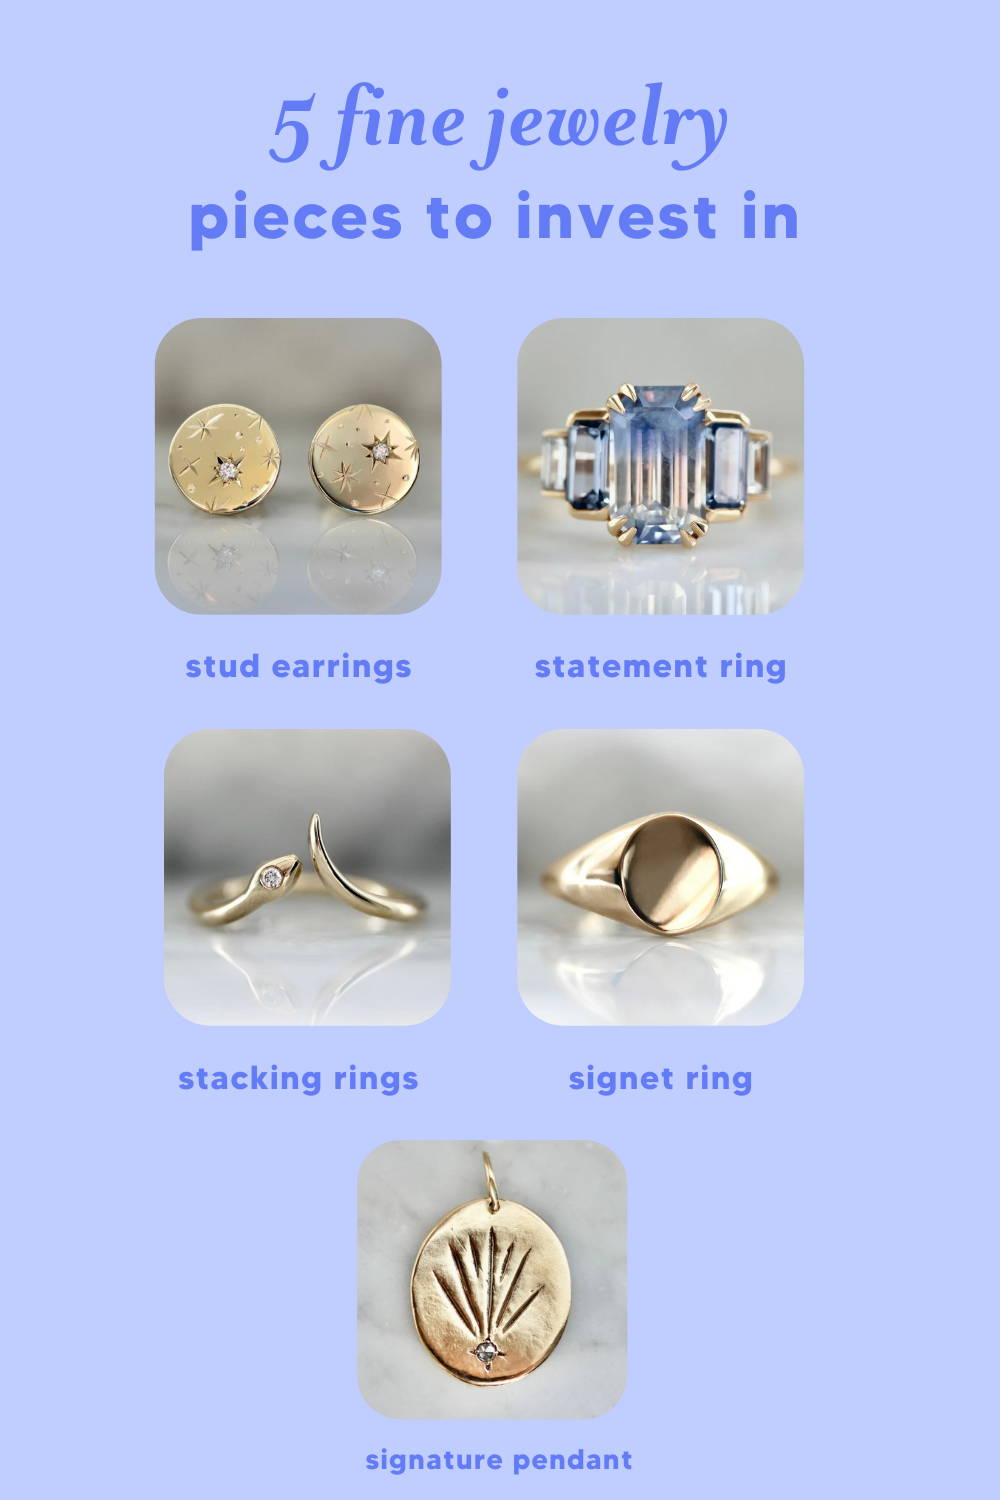 fine jewelry pieces to invest in